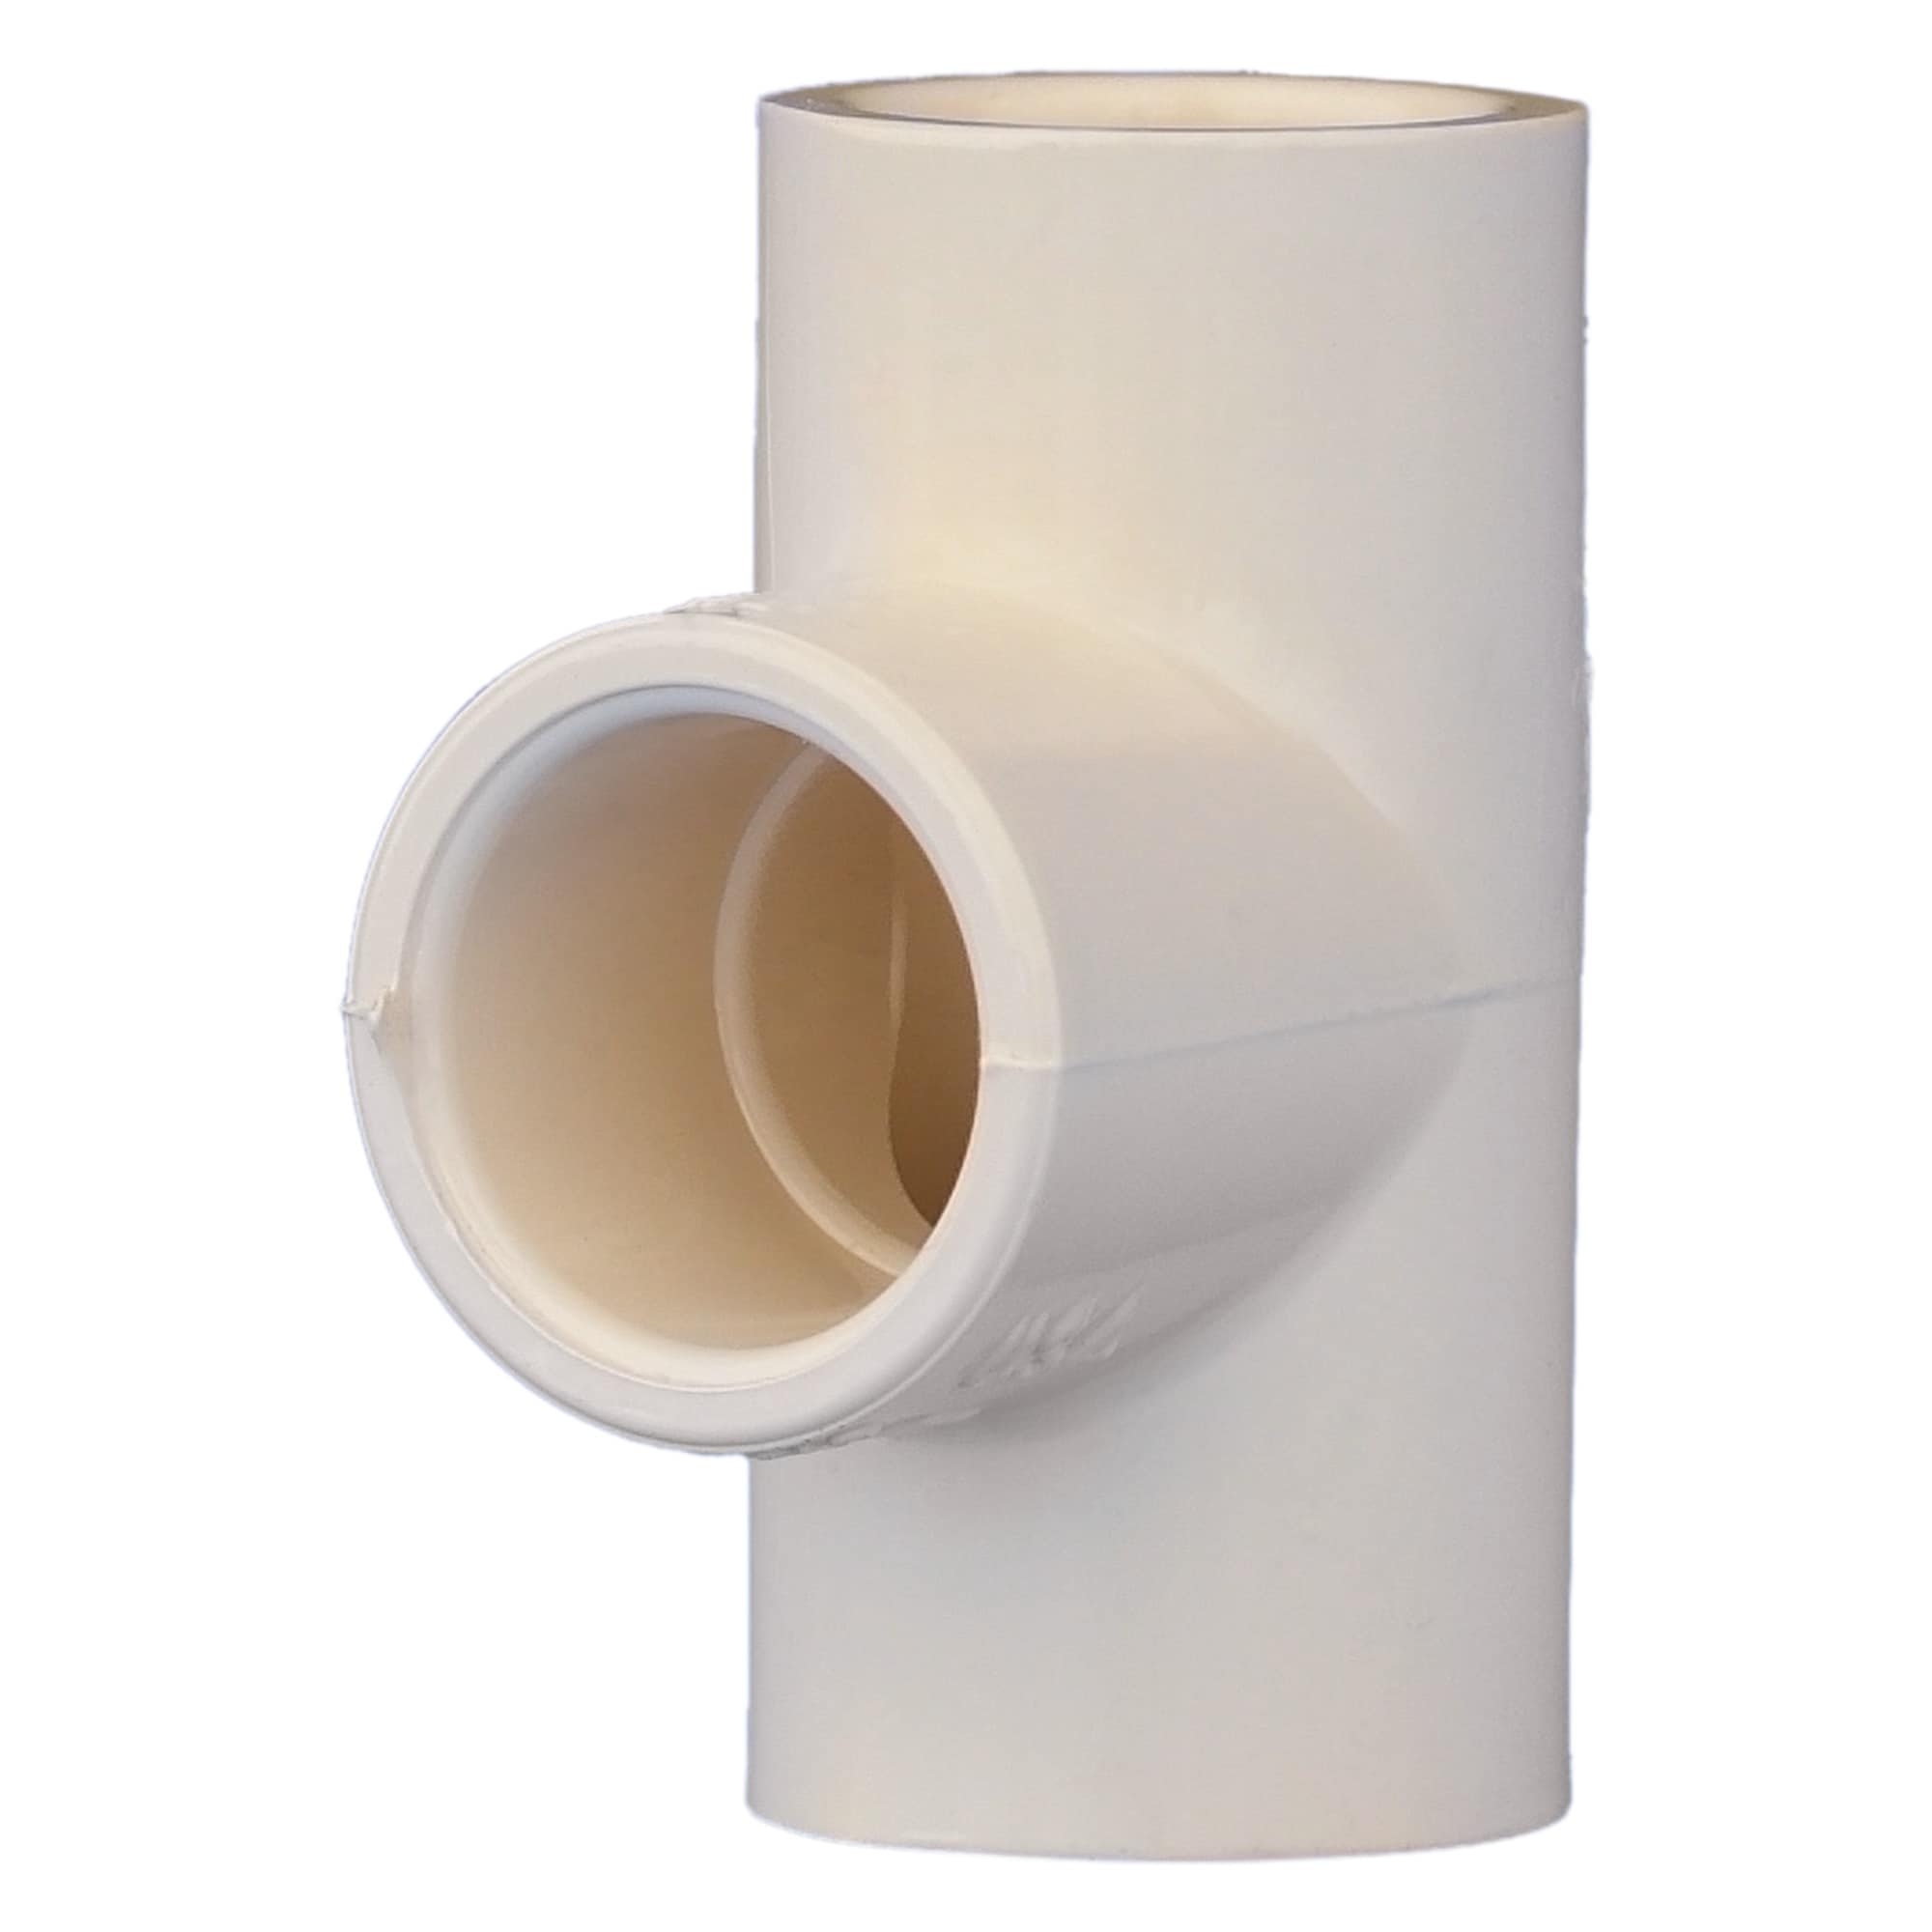 Tee CPVC Pipe & Fittings at Lowes.com